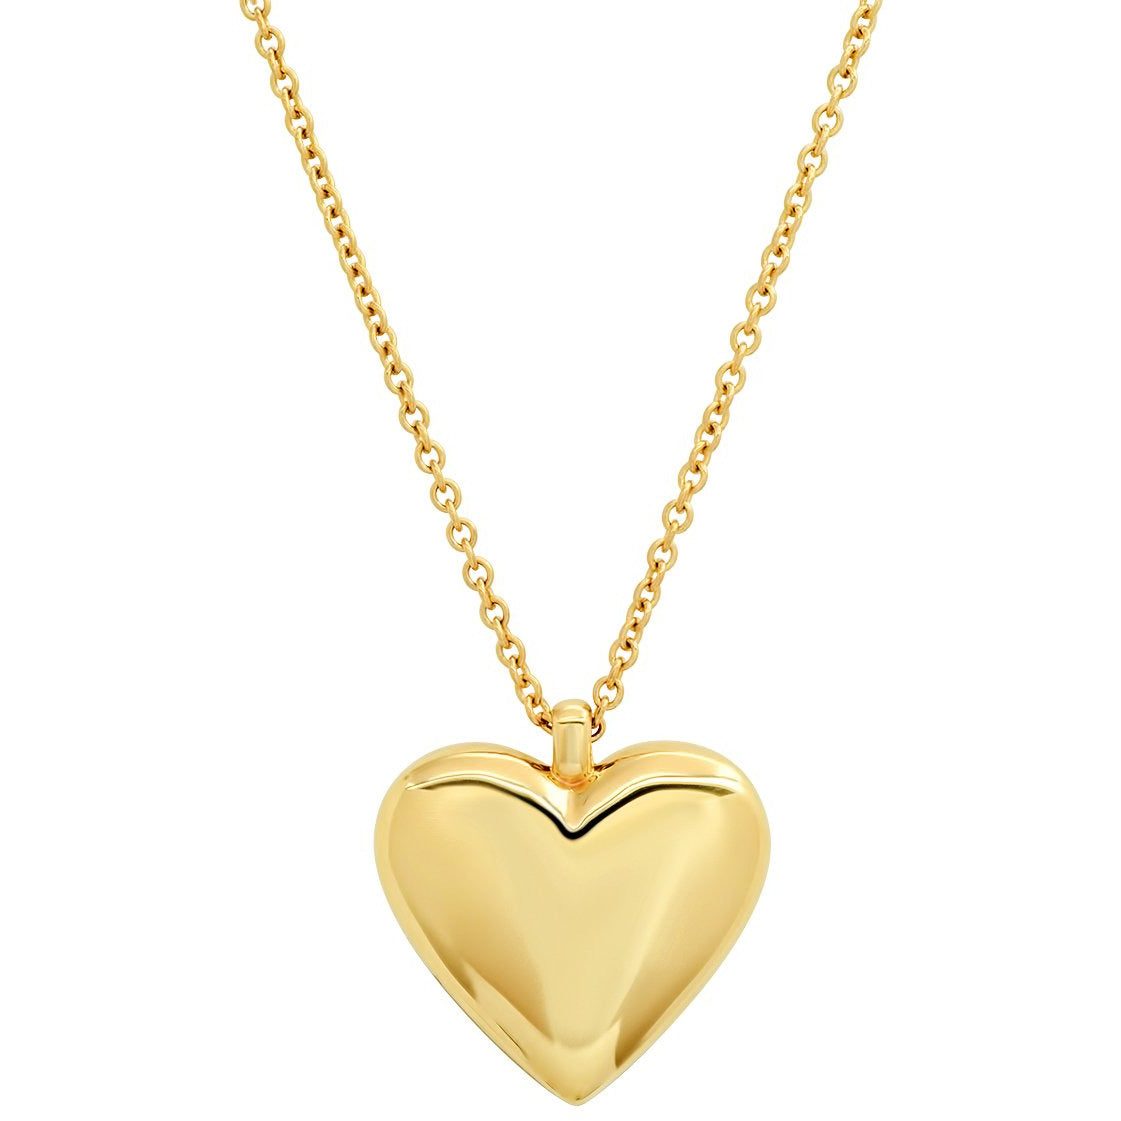 Large Reversible Diamond and Gold Puffy Heart Necklace